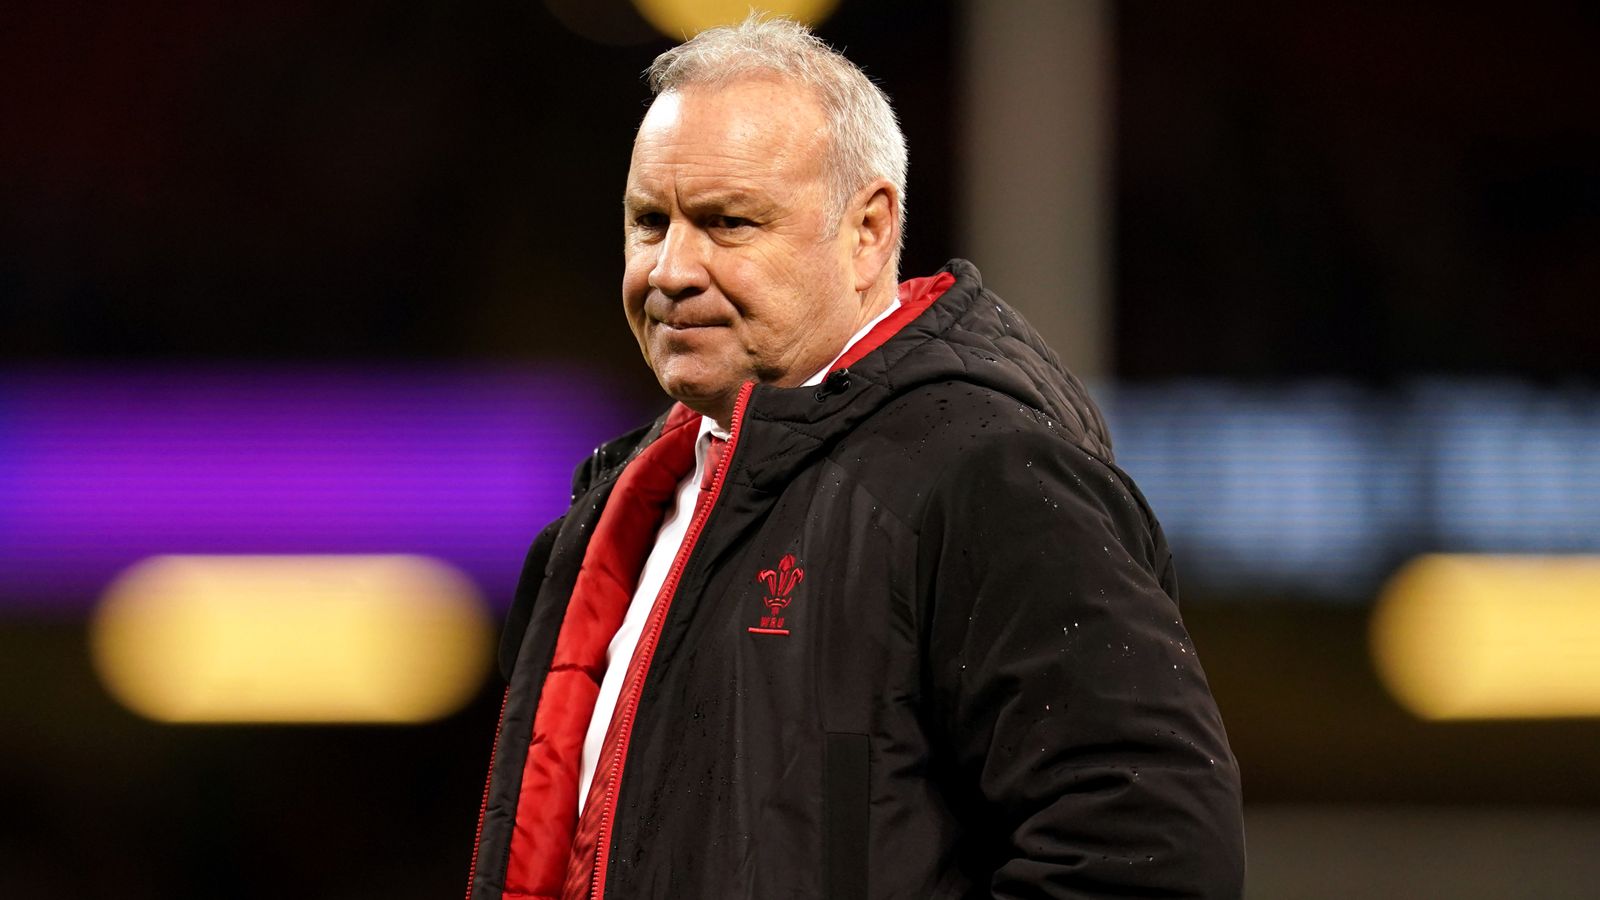 Wayne Pivac believes mental strength will be key for Wales to end winless record in South Africa